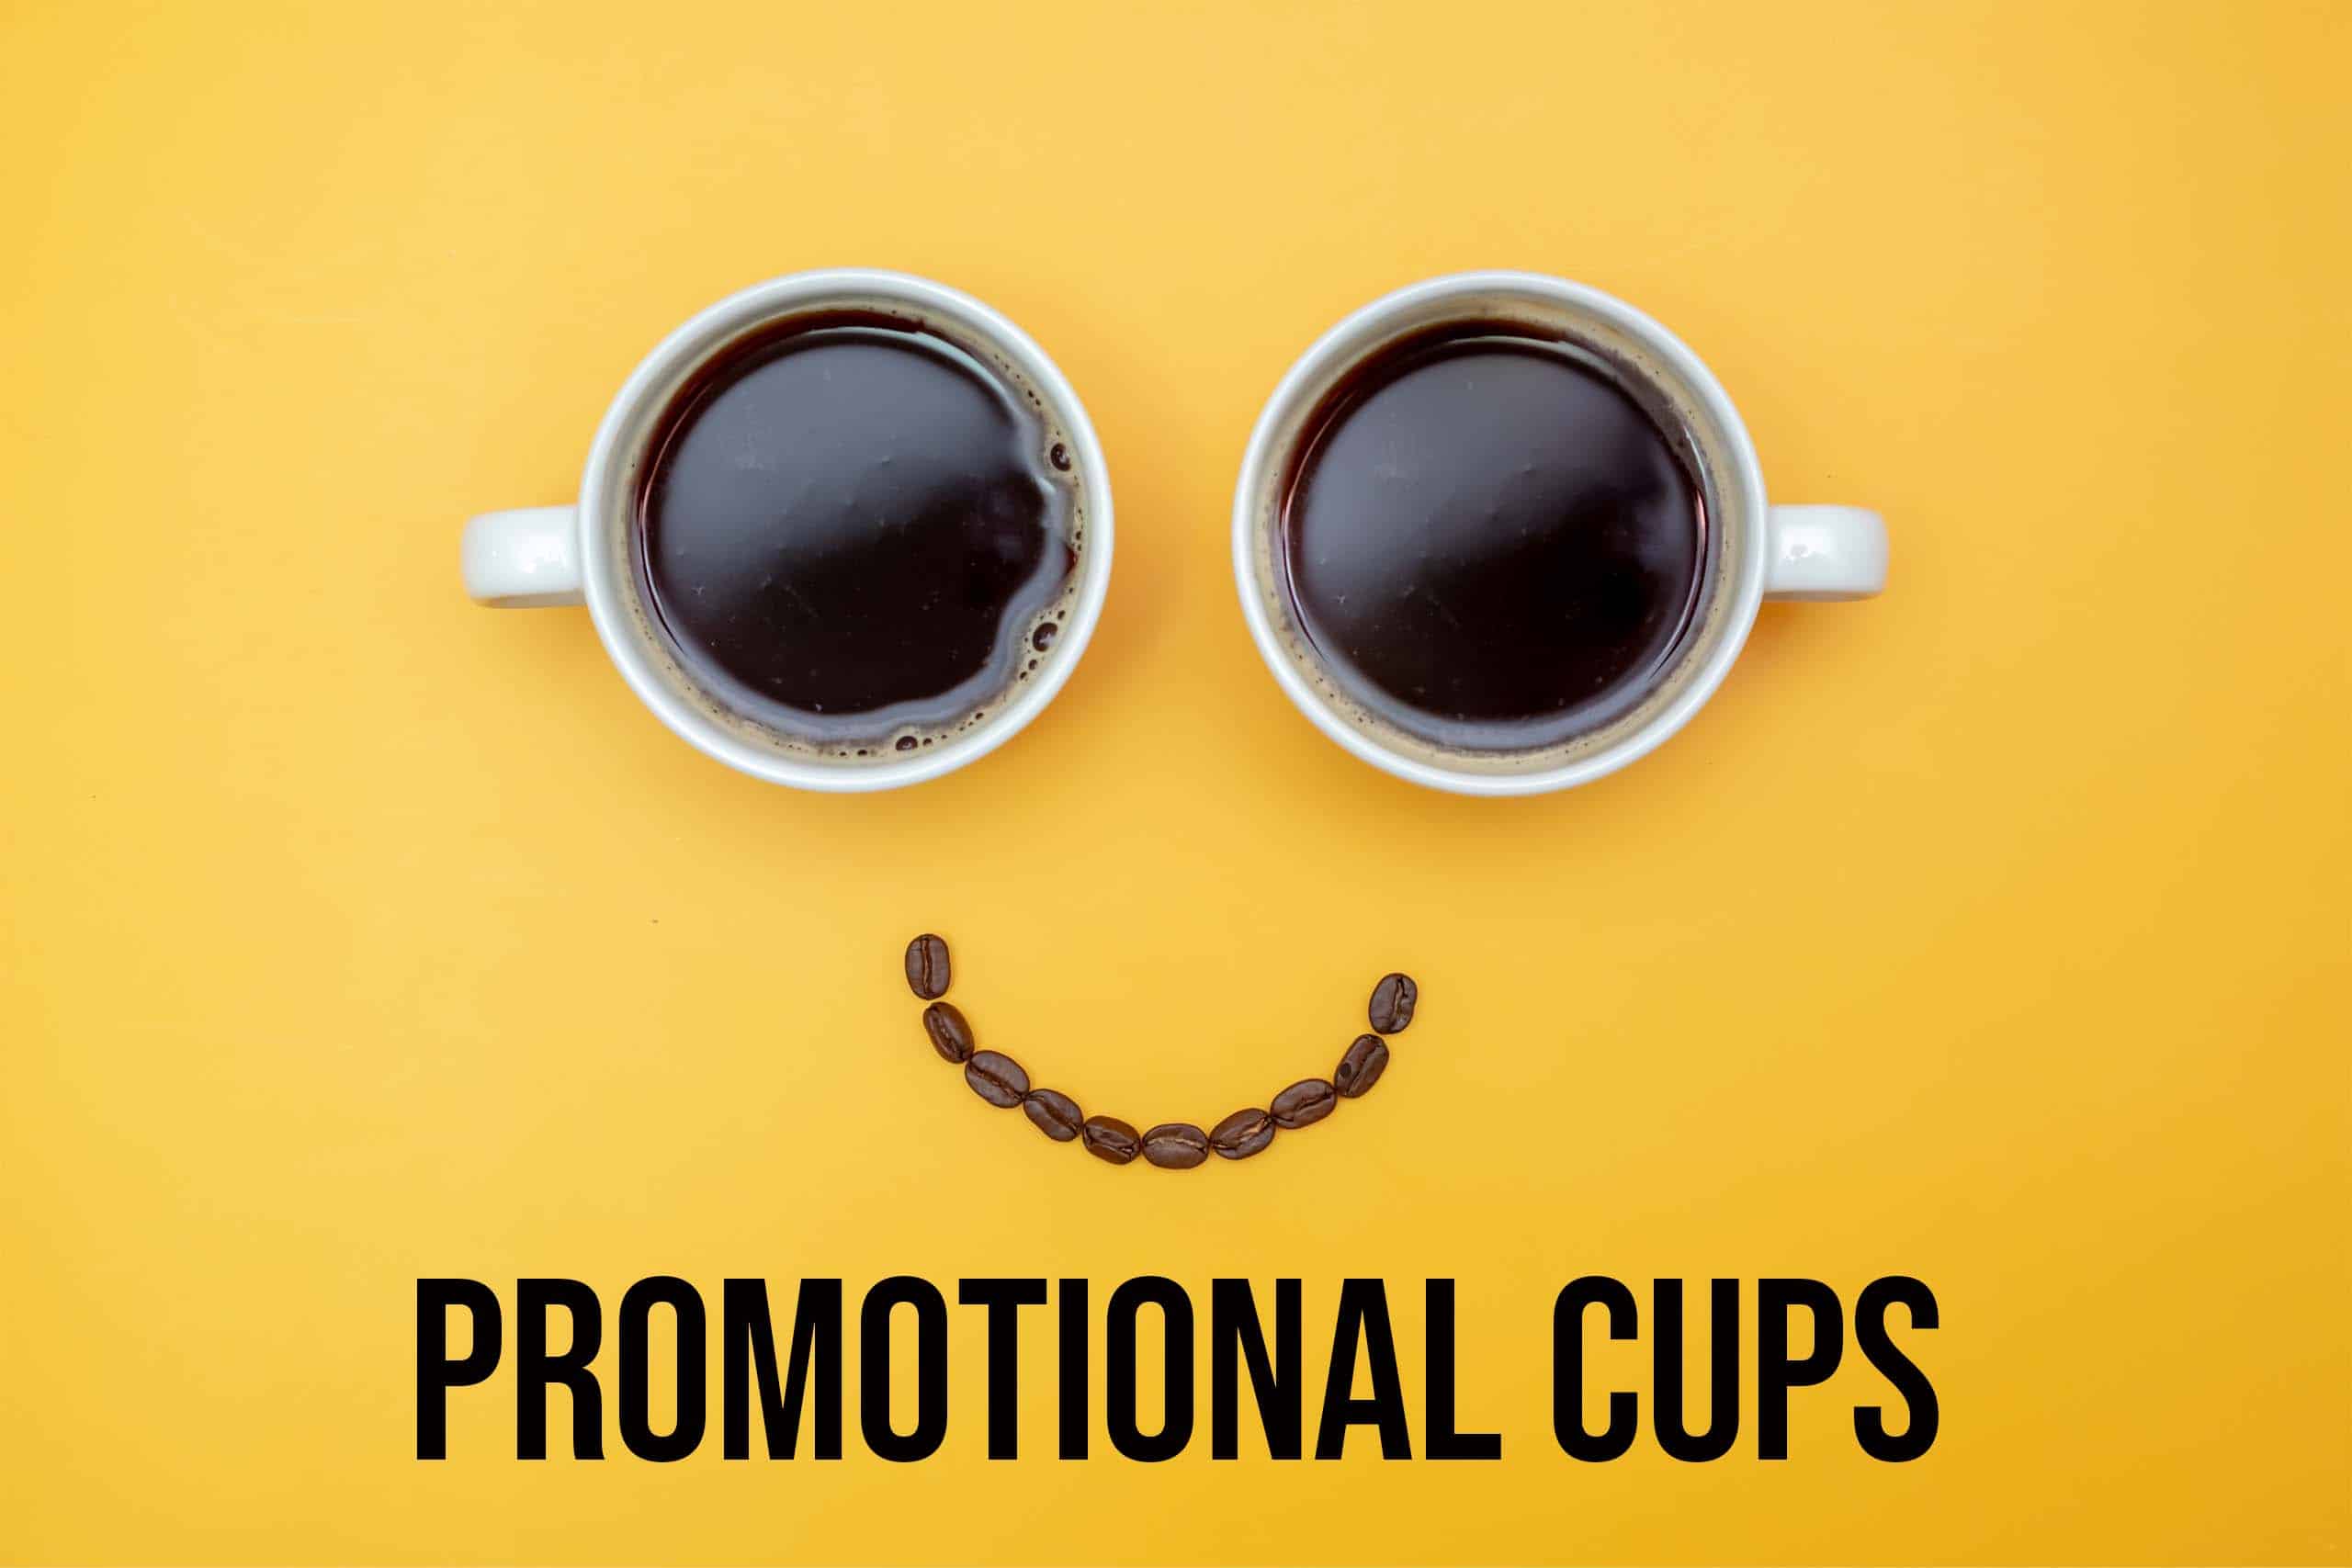 Promotional cups